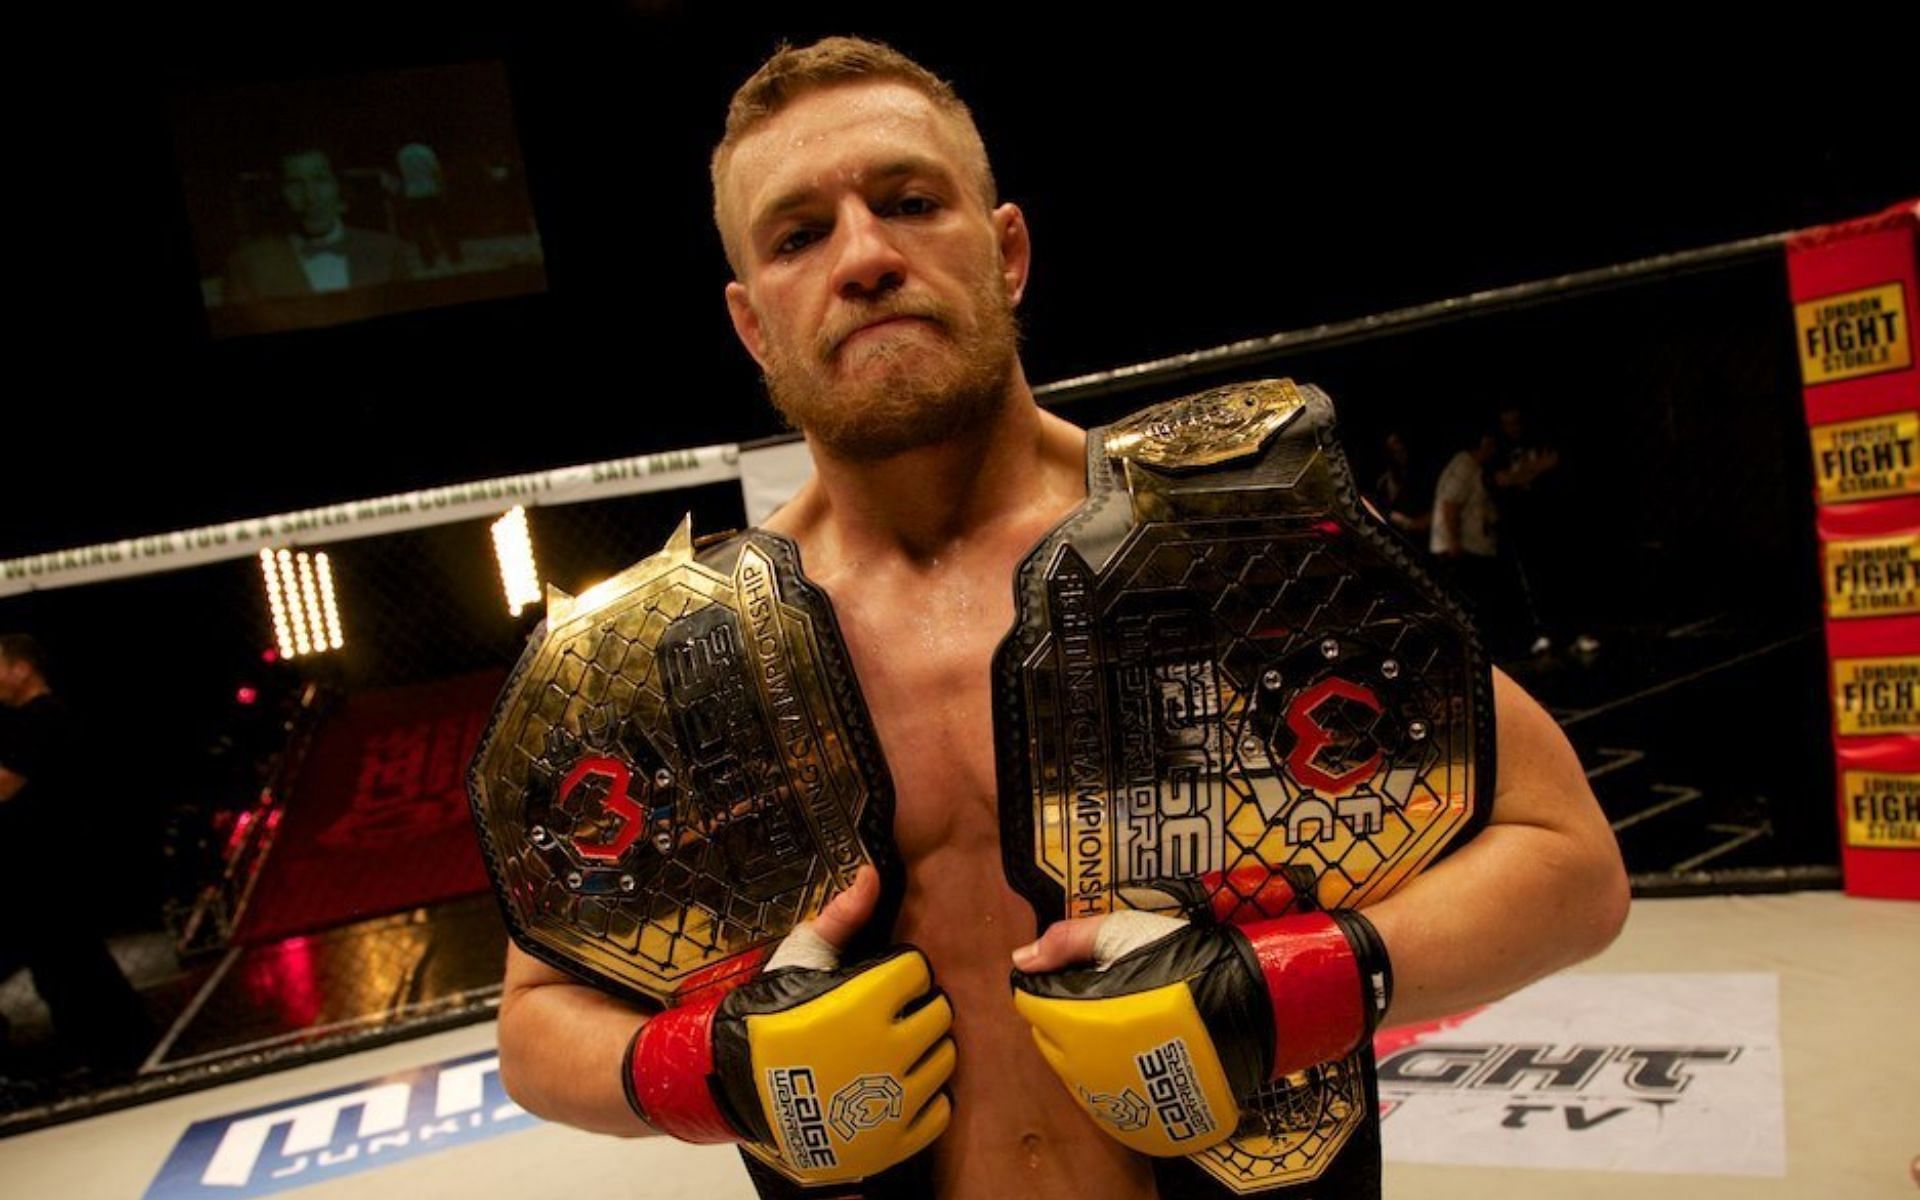 Conor McGregor as double champ at Cage Warriors. [via Cage Warriors]